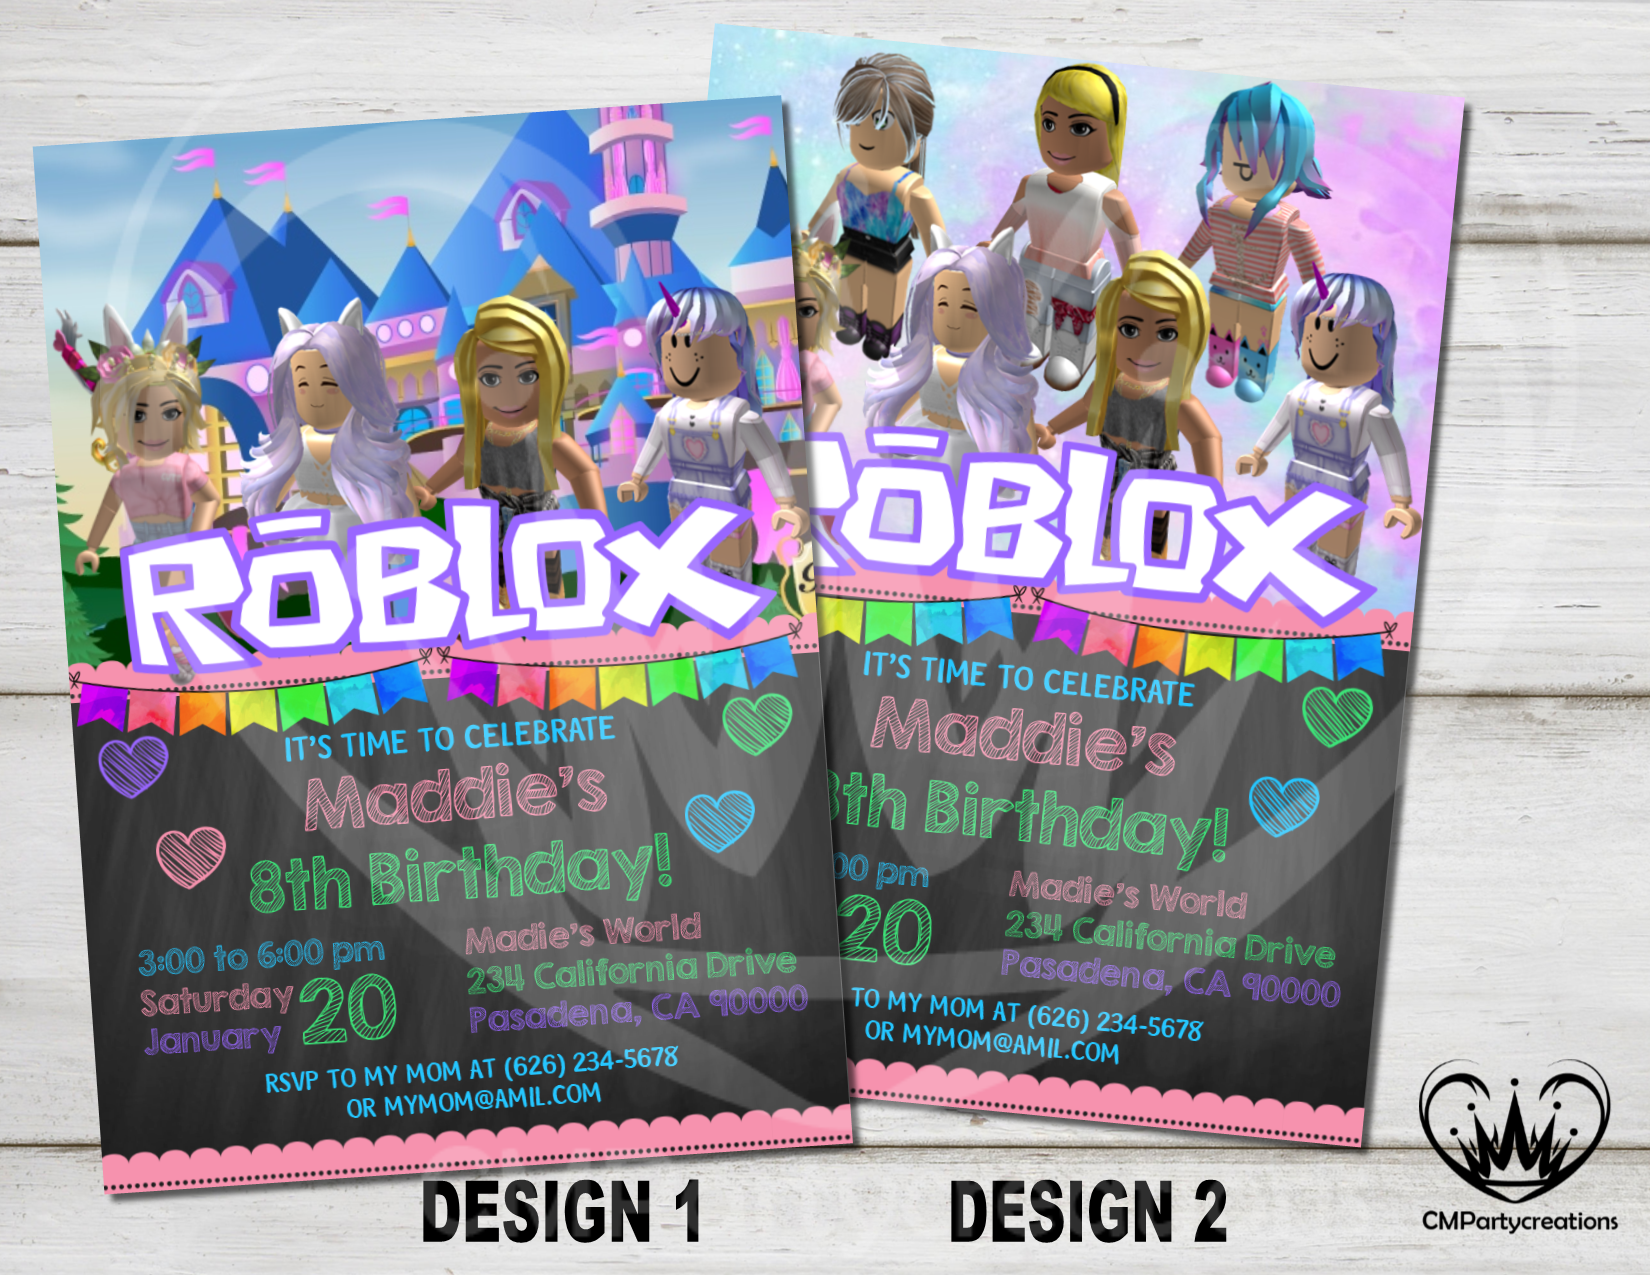 Roblox Invitation Birthday Party Cmpartycreations - robuxparty